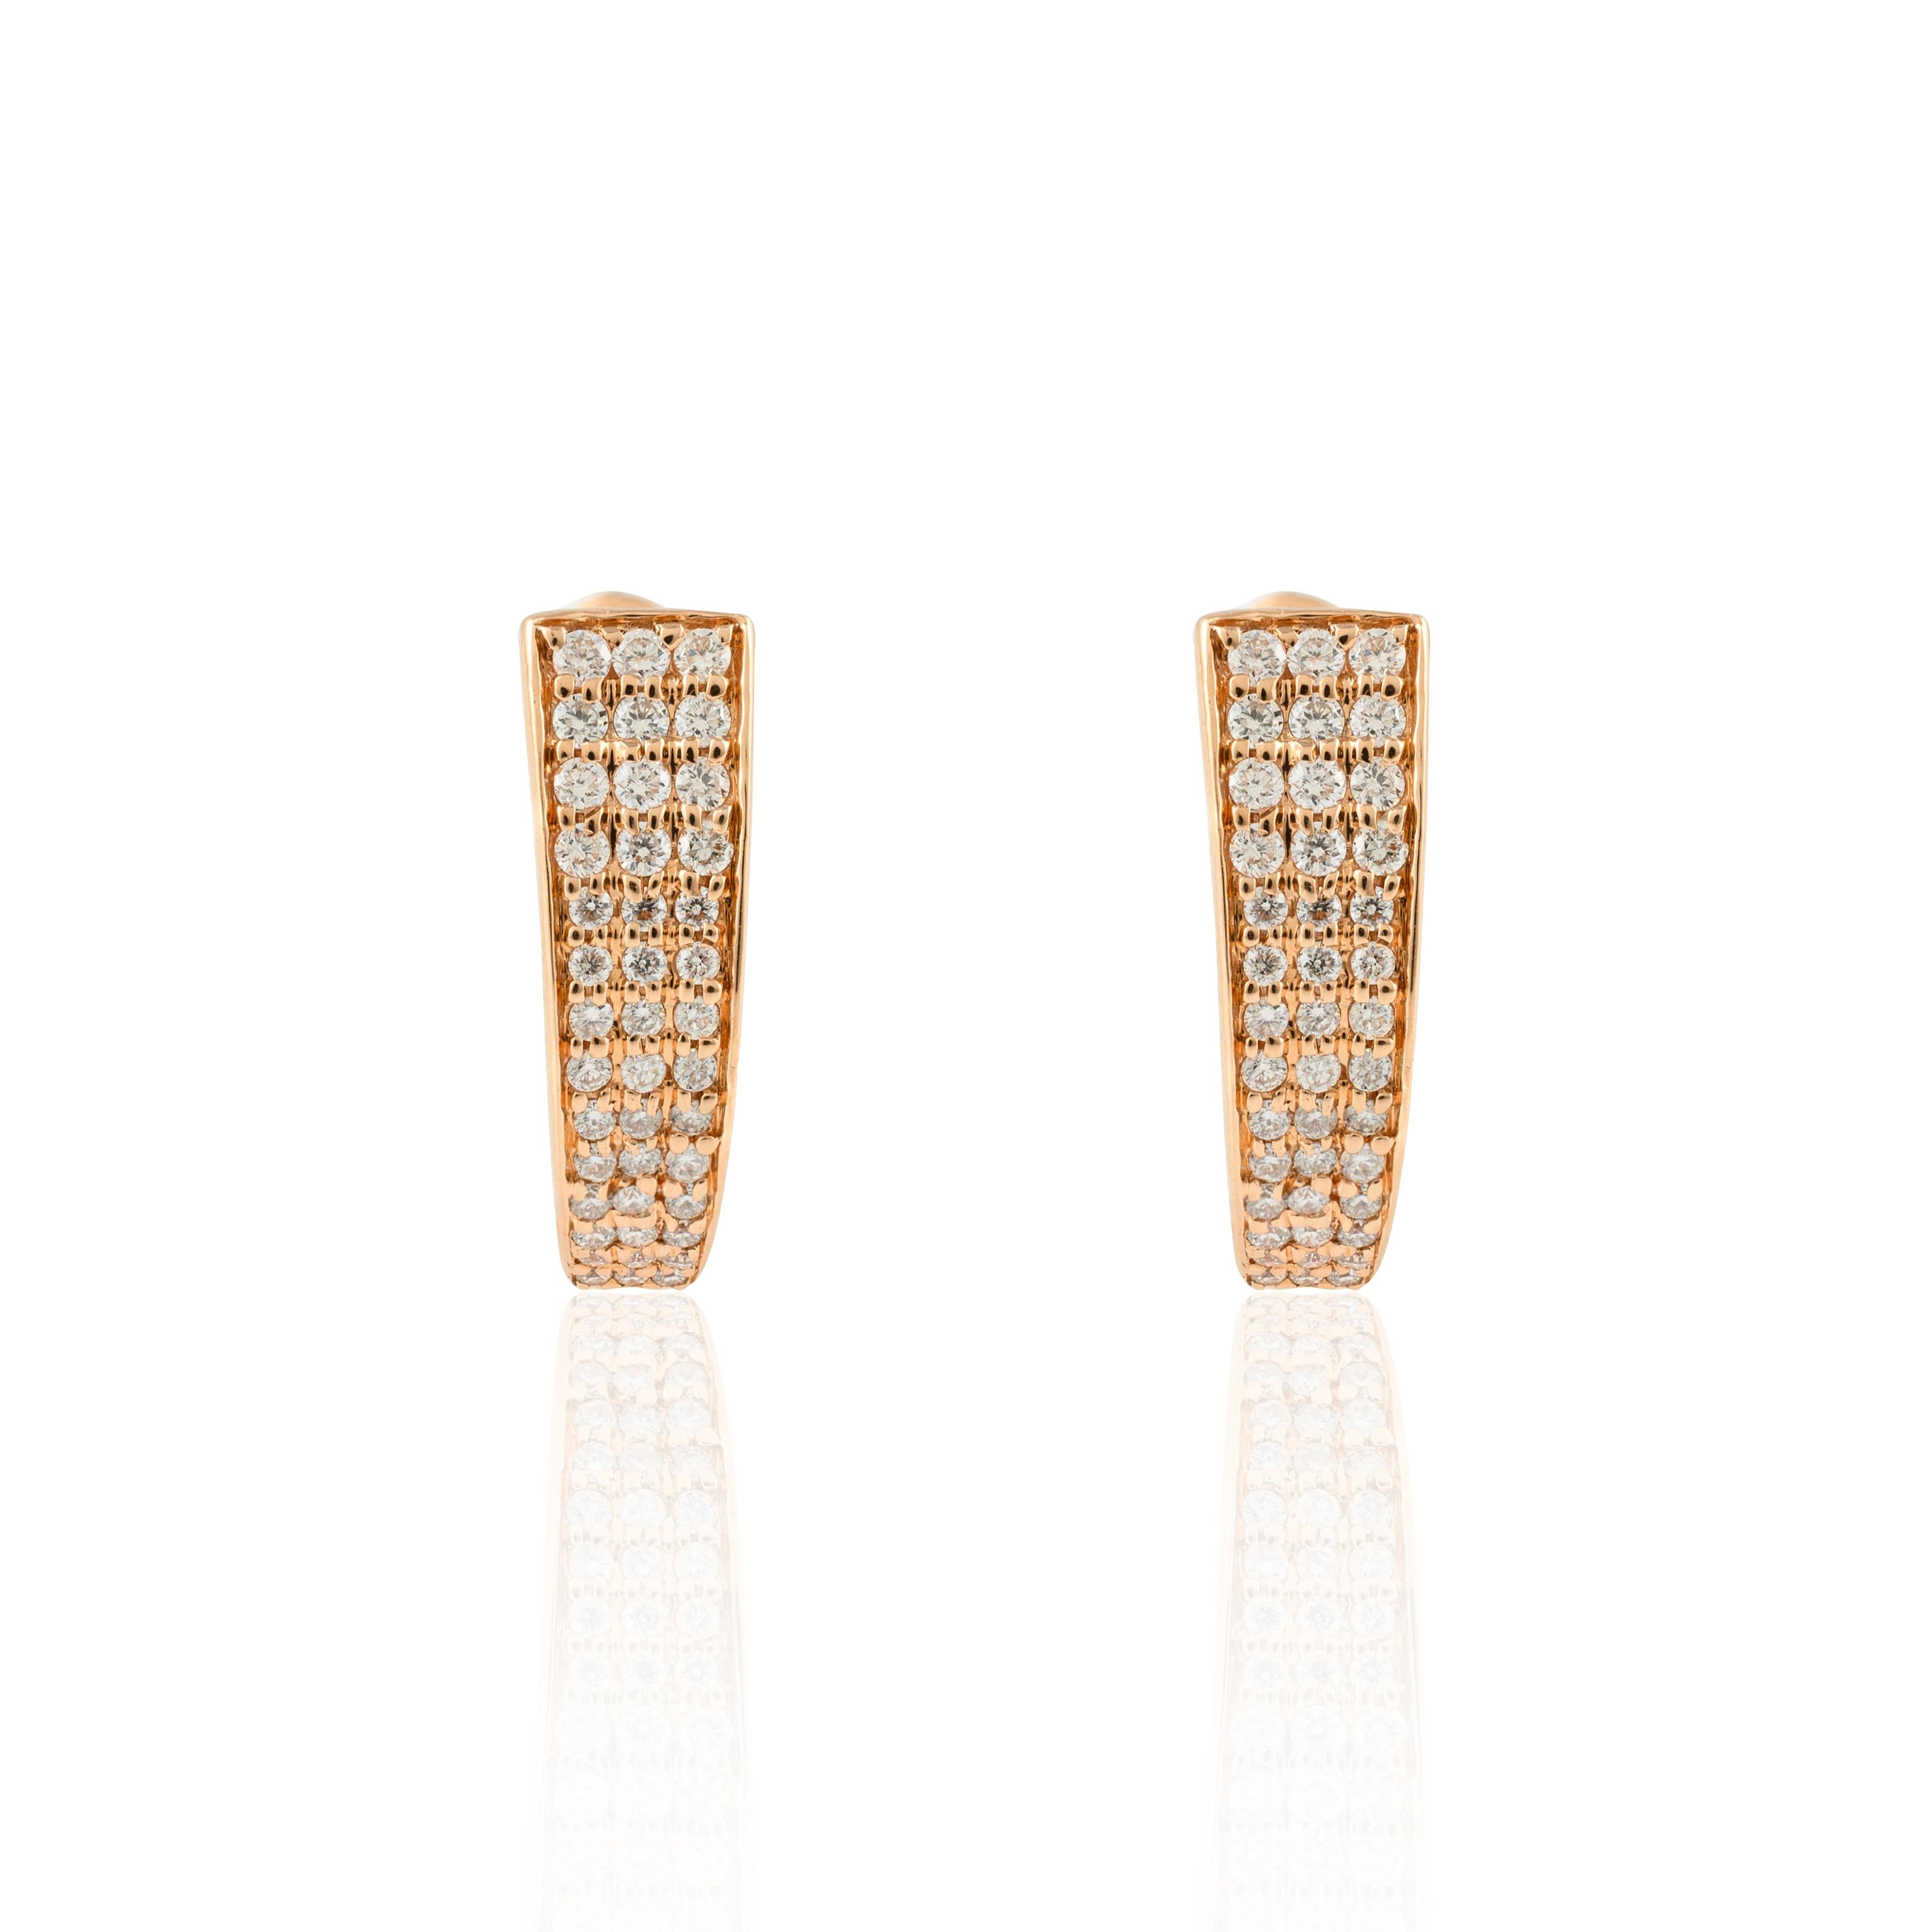 Contemporary Diamond Earrings Everyday Fine Jewelry For Women in 18k Solid Rose Gold For Sale